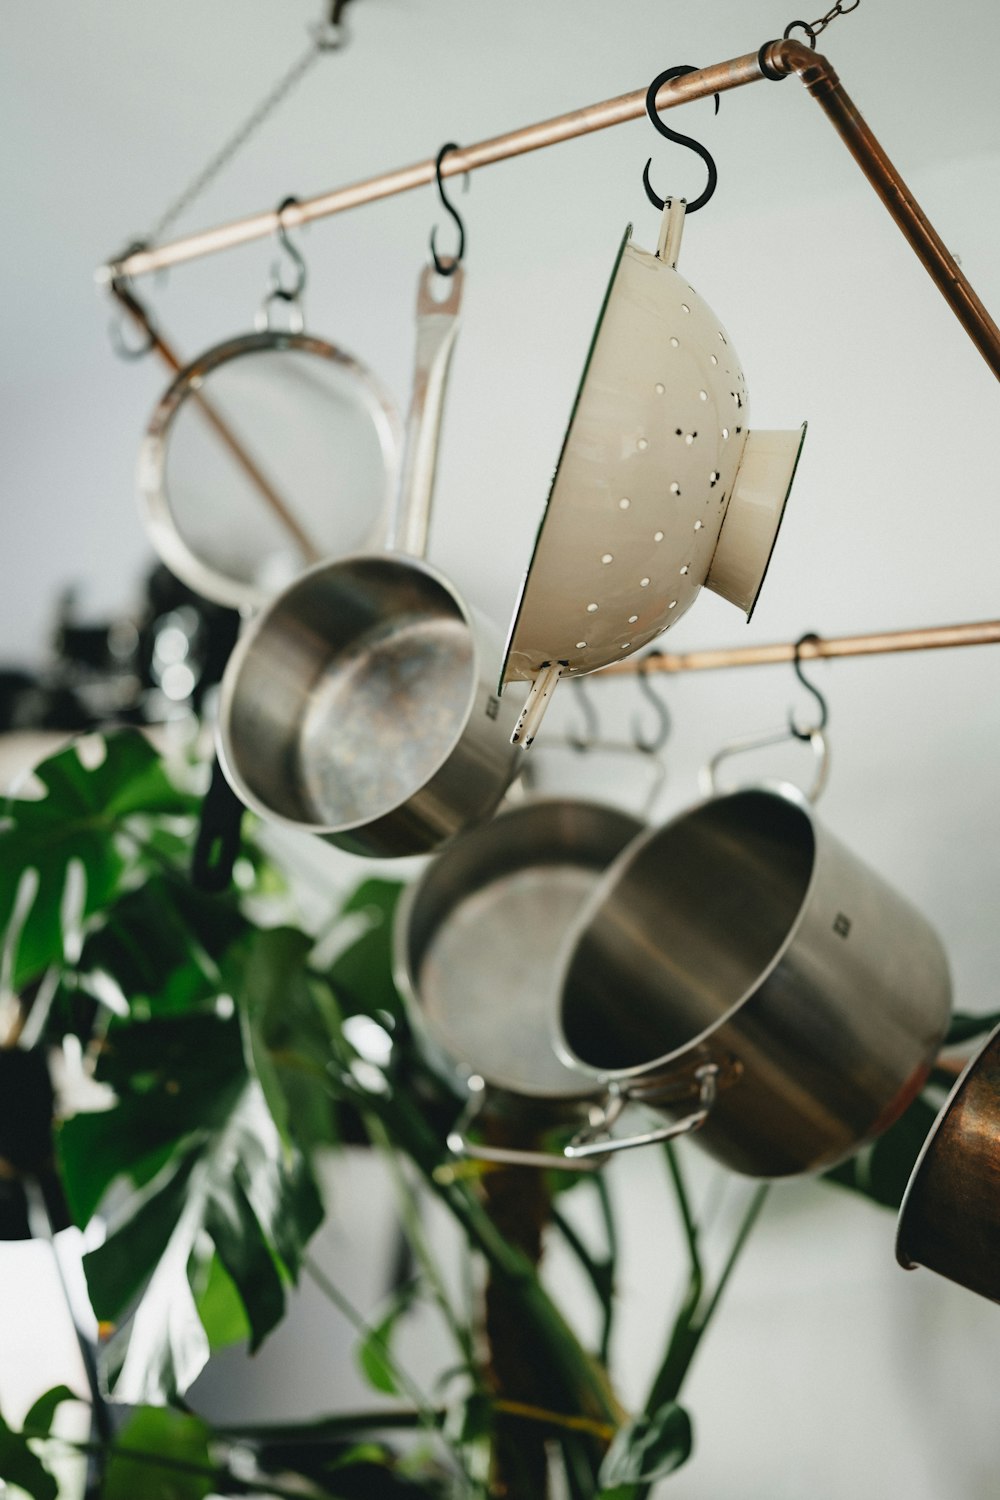 stainless steel cooking pots hanging on green plant